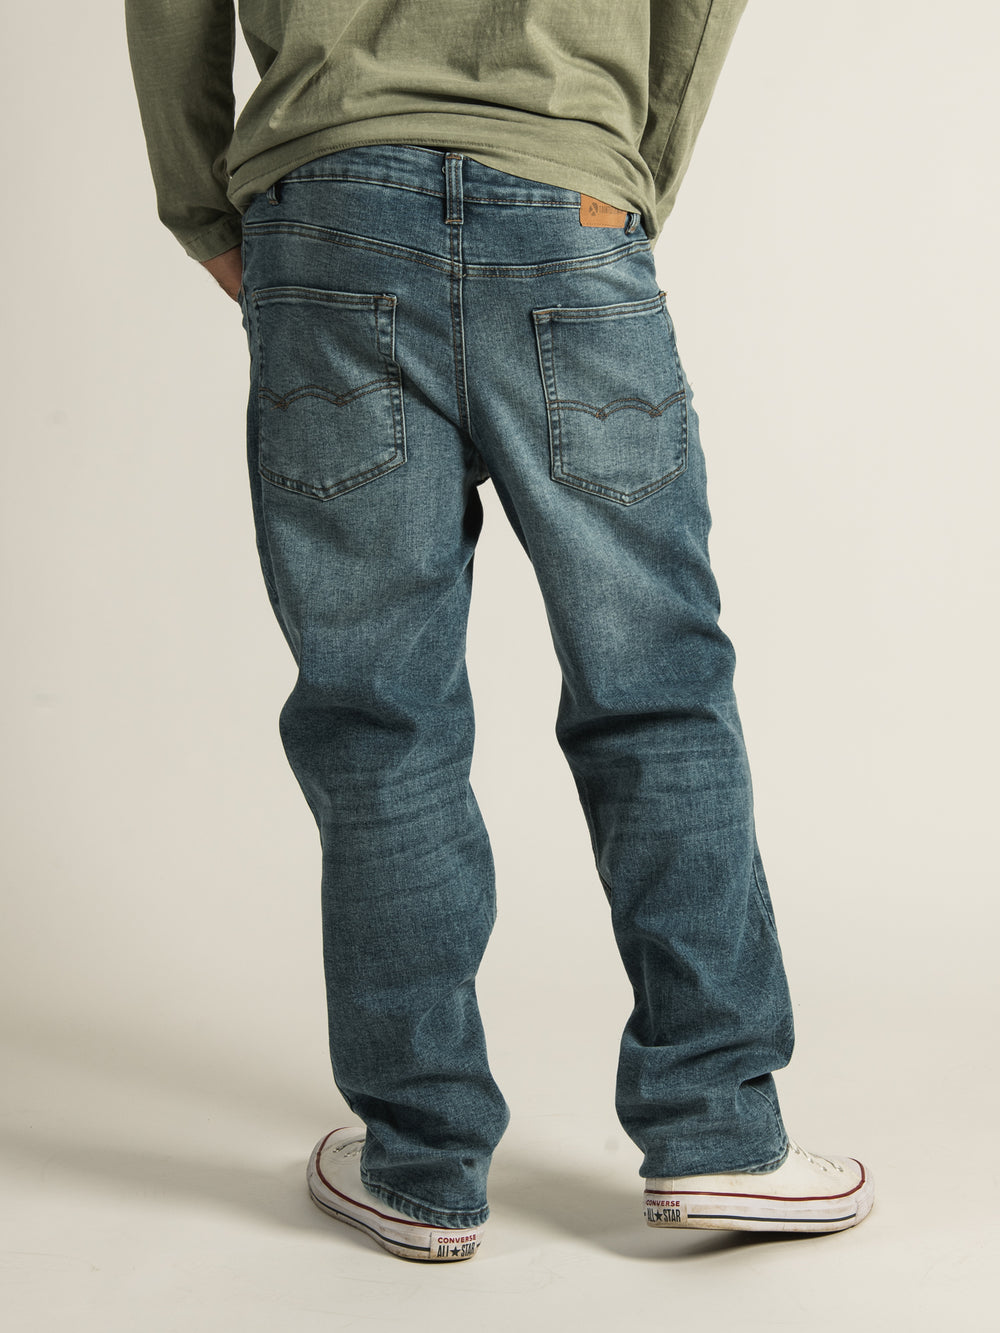 TAINTED RELAXED 5 POCKET DENIM  - CLEARANCE